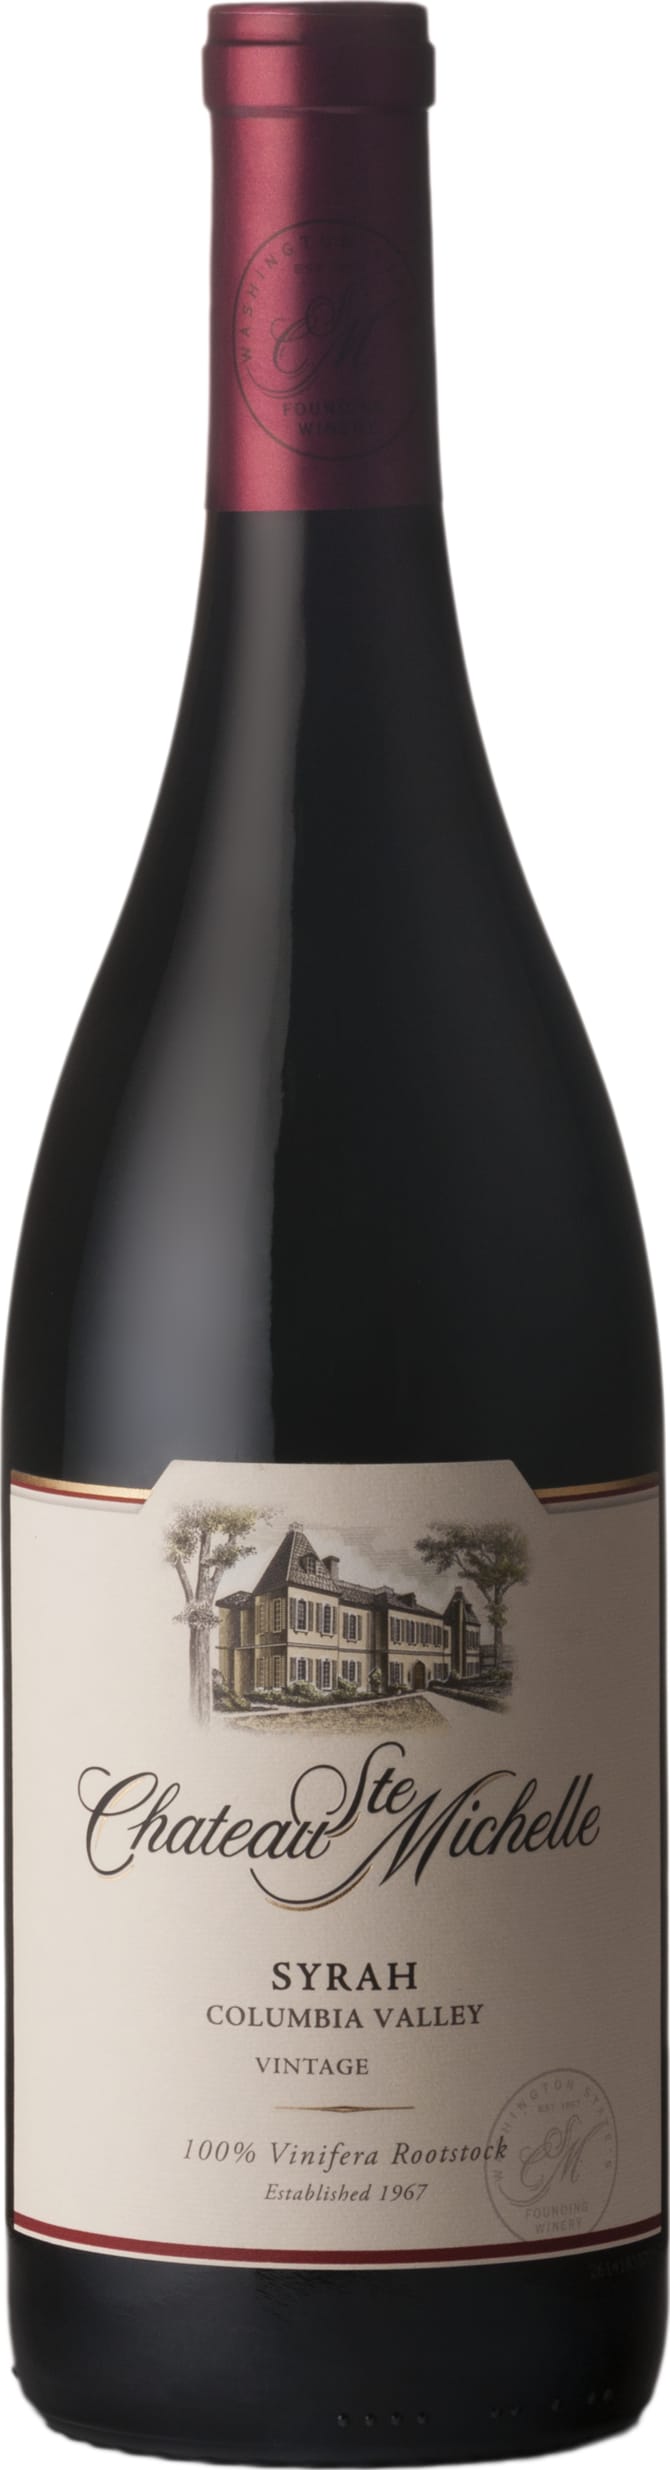 Chateau Ste Michelle Columbia Valley Syrah 2019 75cl - Buy Chateau Ste Michelle Wines from GREAT WINES DIRECT wine shop